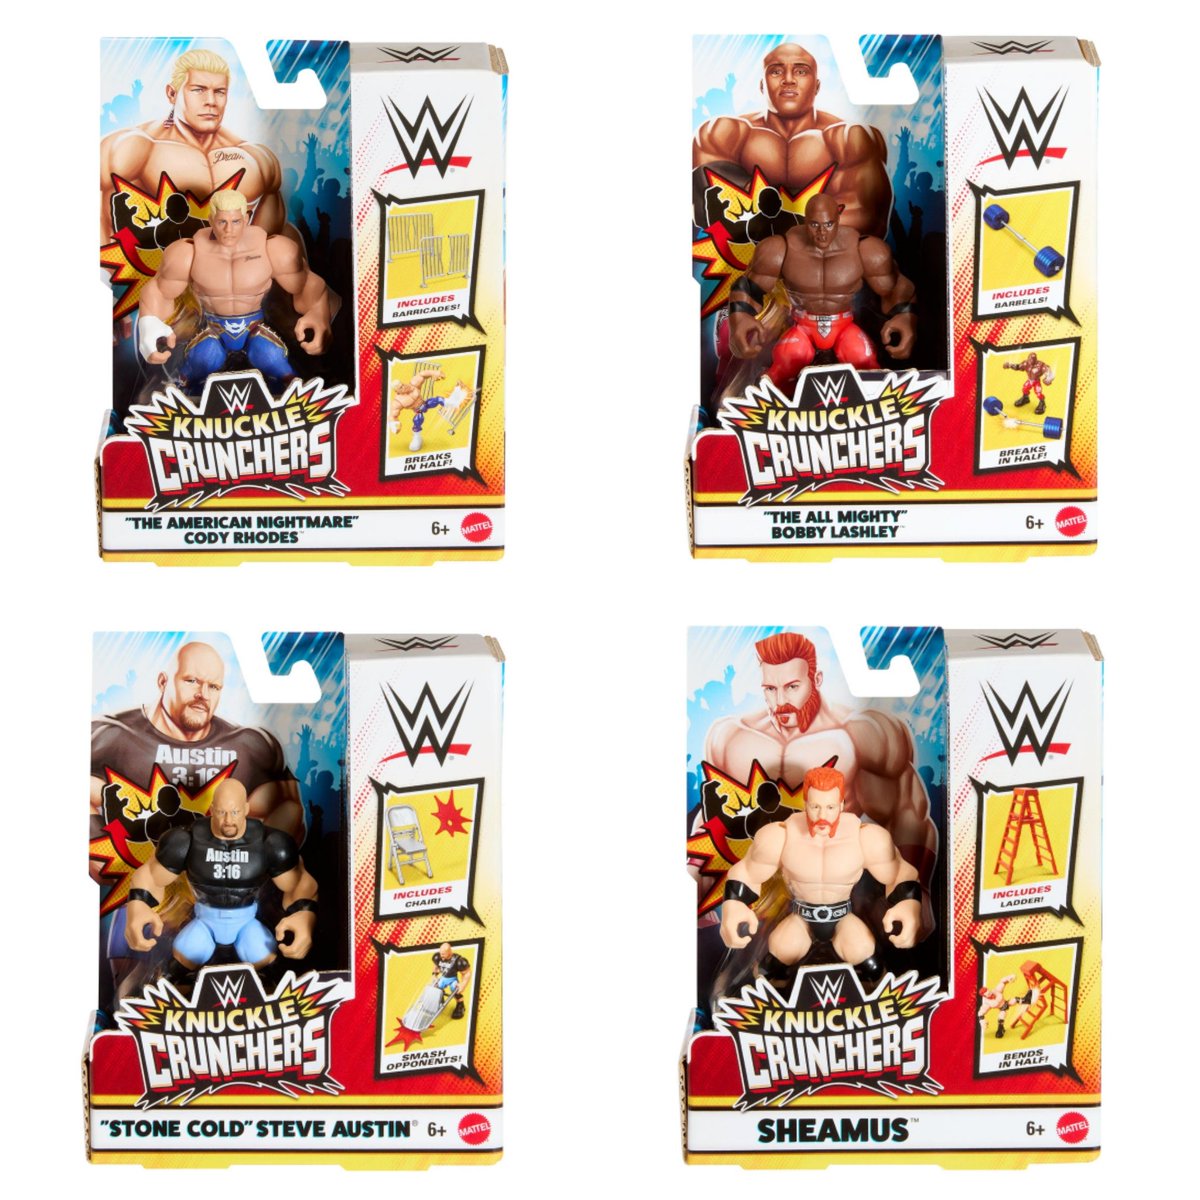 New images of @Mattel's WWE Knuckle Crunchers Wave 2! Each figure features 'crunchable' arms and action accessory! @CodyRhodes @fightbobby @steveaustinBSR @WWESheamus Available spring 2024! #WWEEliteSquad #ScratchThatFigureItch